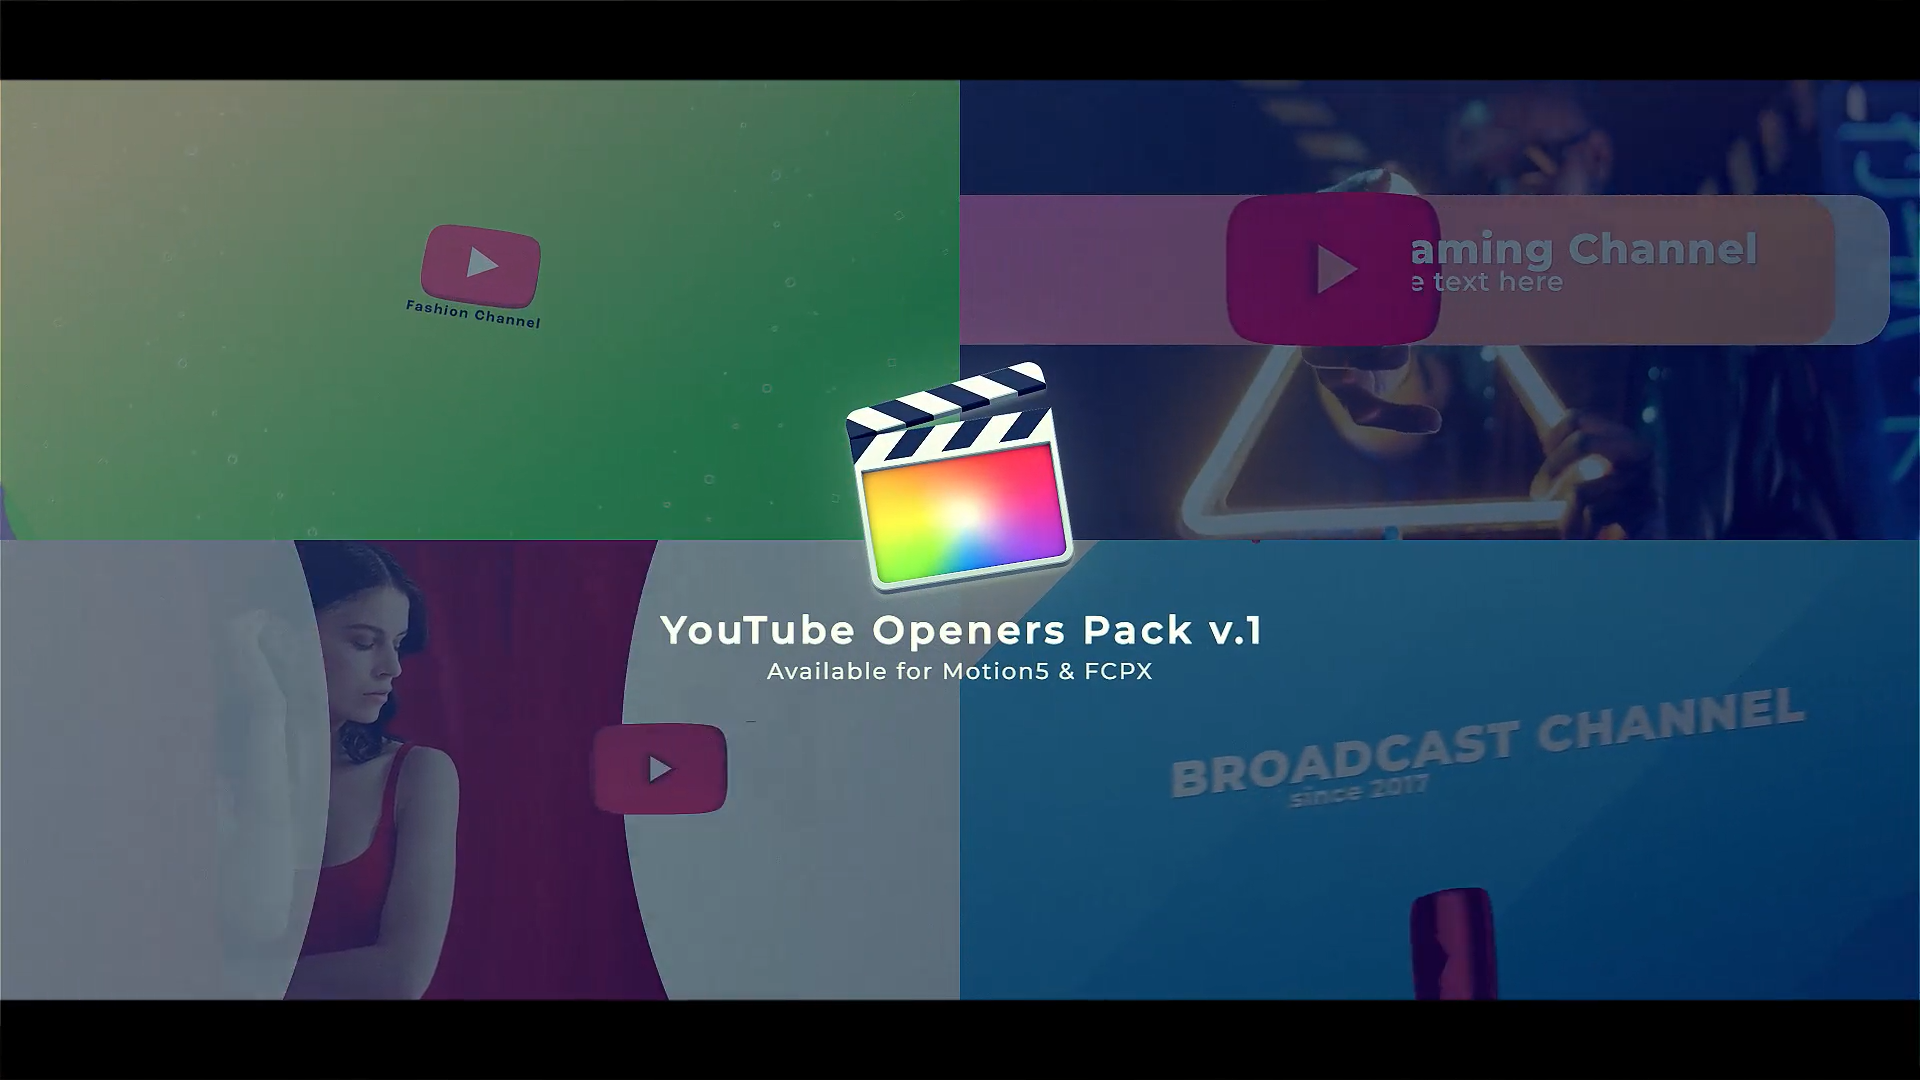 fcpx发生器YouTube Openers Pack(YouTube动画开场)